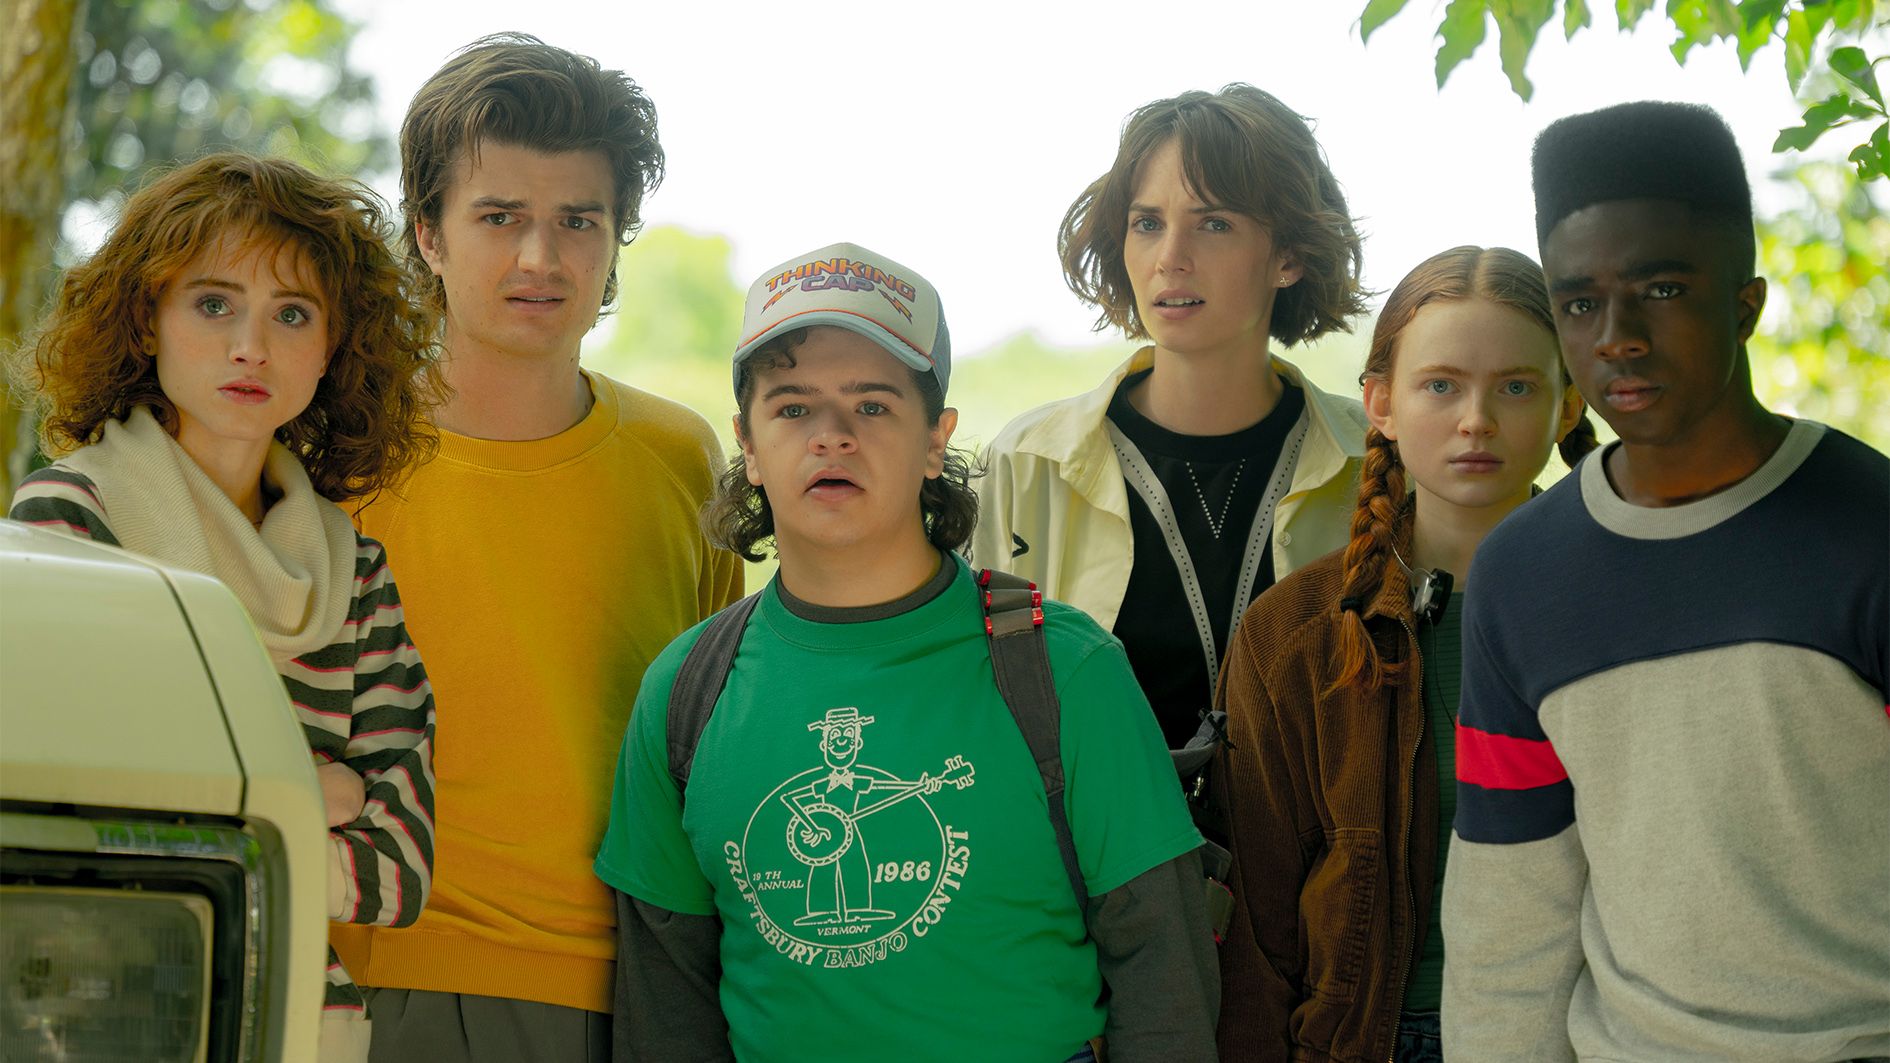 Stranger Things: What Happened at the End of Season 1